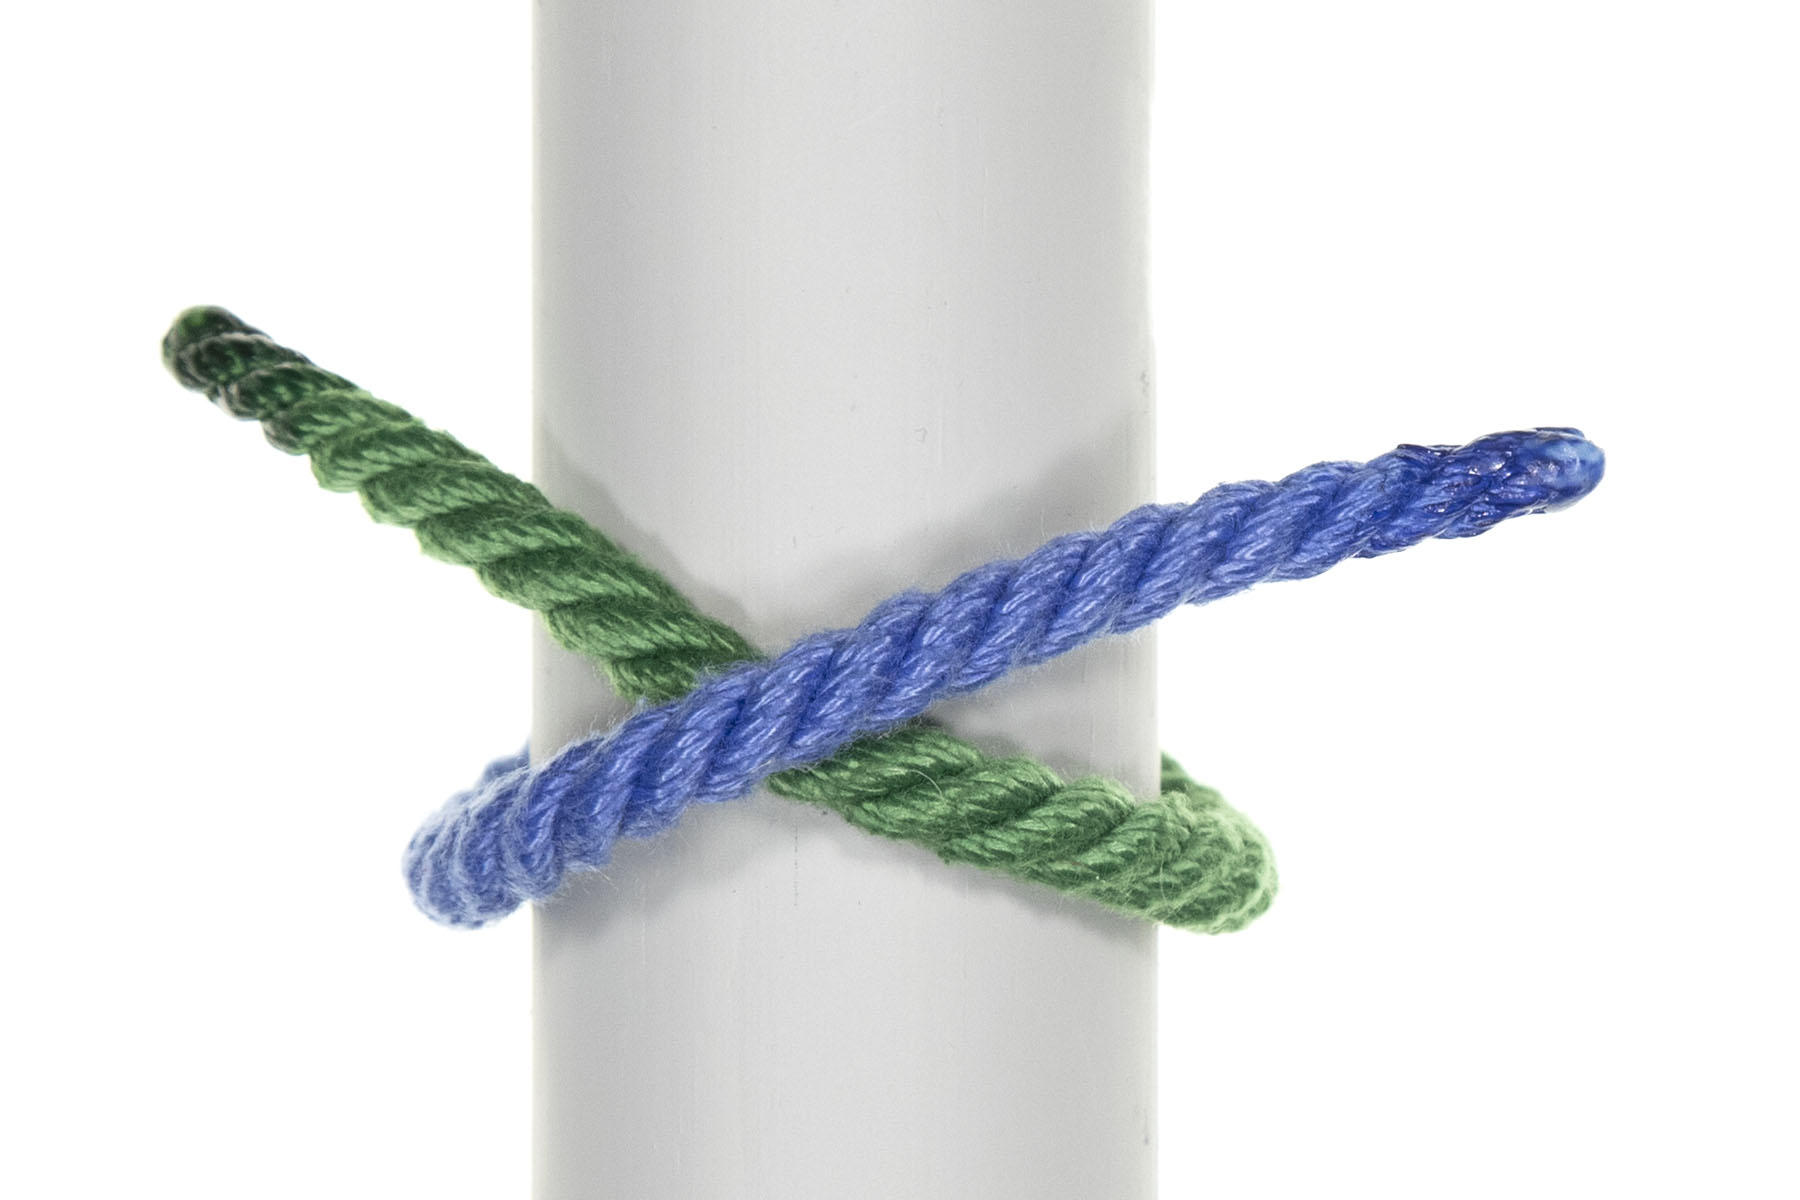 A three inch diameter gray pole divides the frame vertically. A green rope emerges from behind the pole on the right side and goes upward around the pole at a 30 degree angle. About two inches of rope extend beyond the left edge of the pole. A blue rope mirrors the green one, entering from the left and crossing over the green rope.